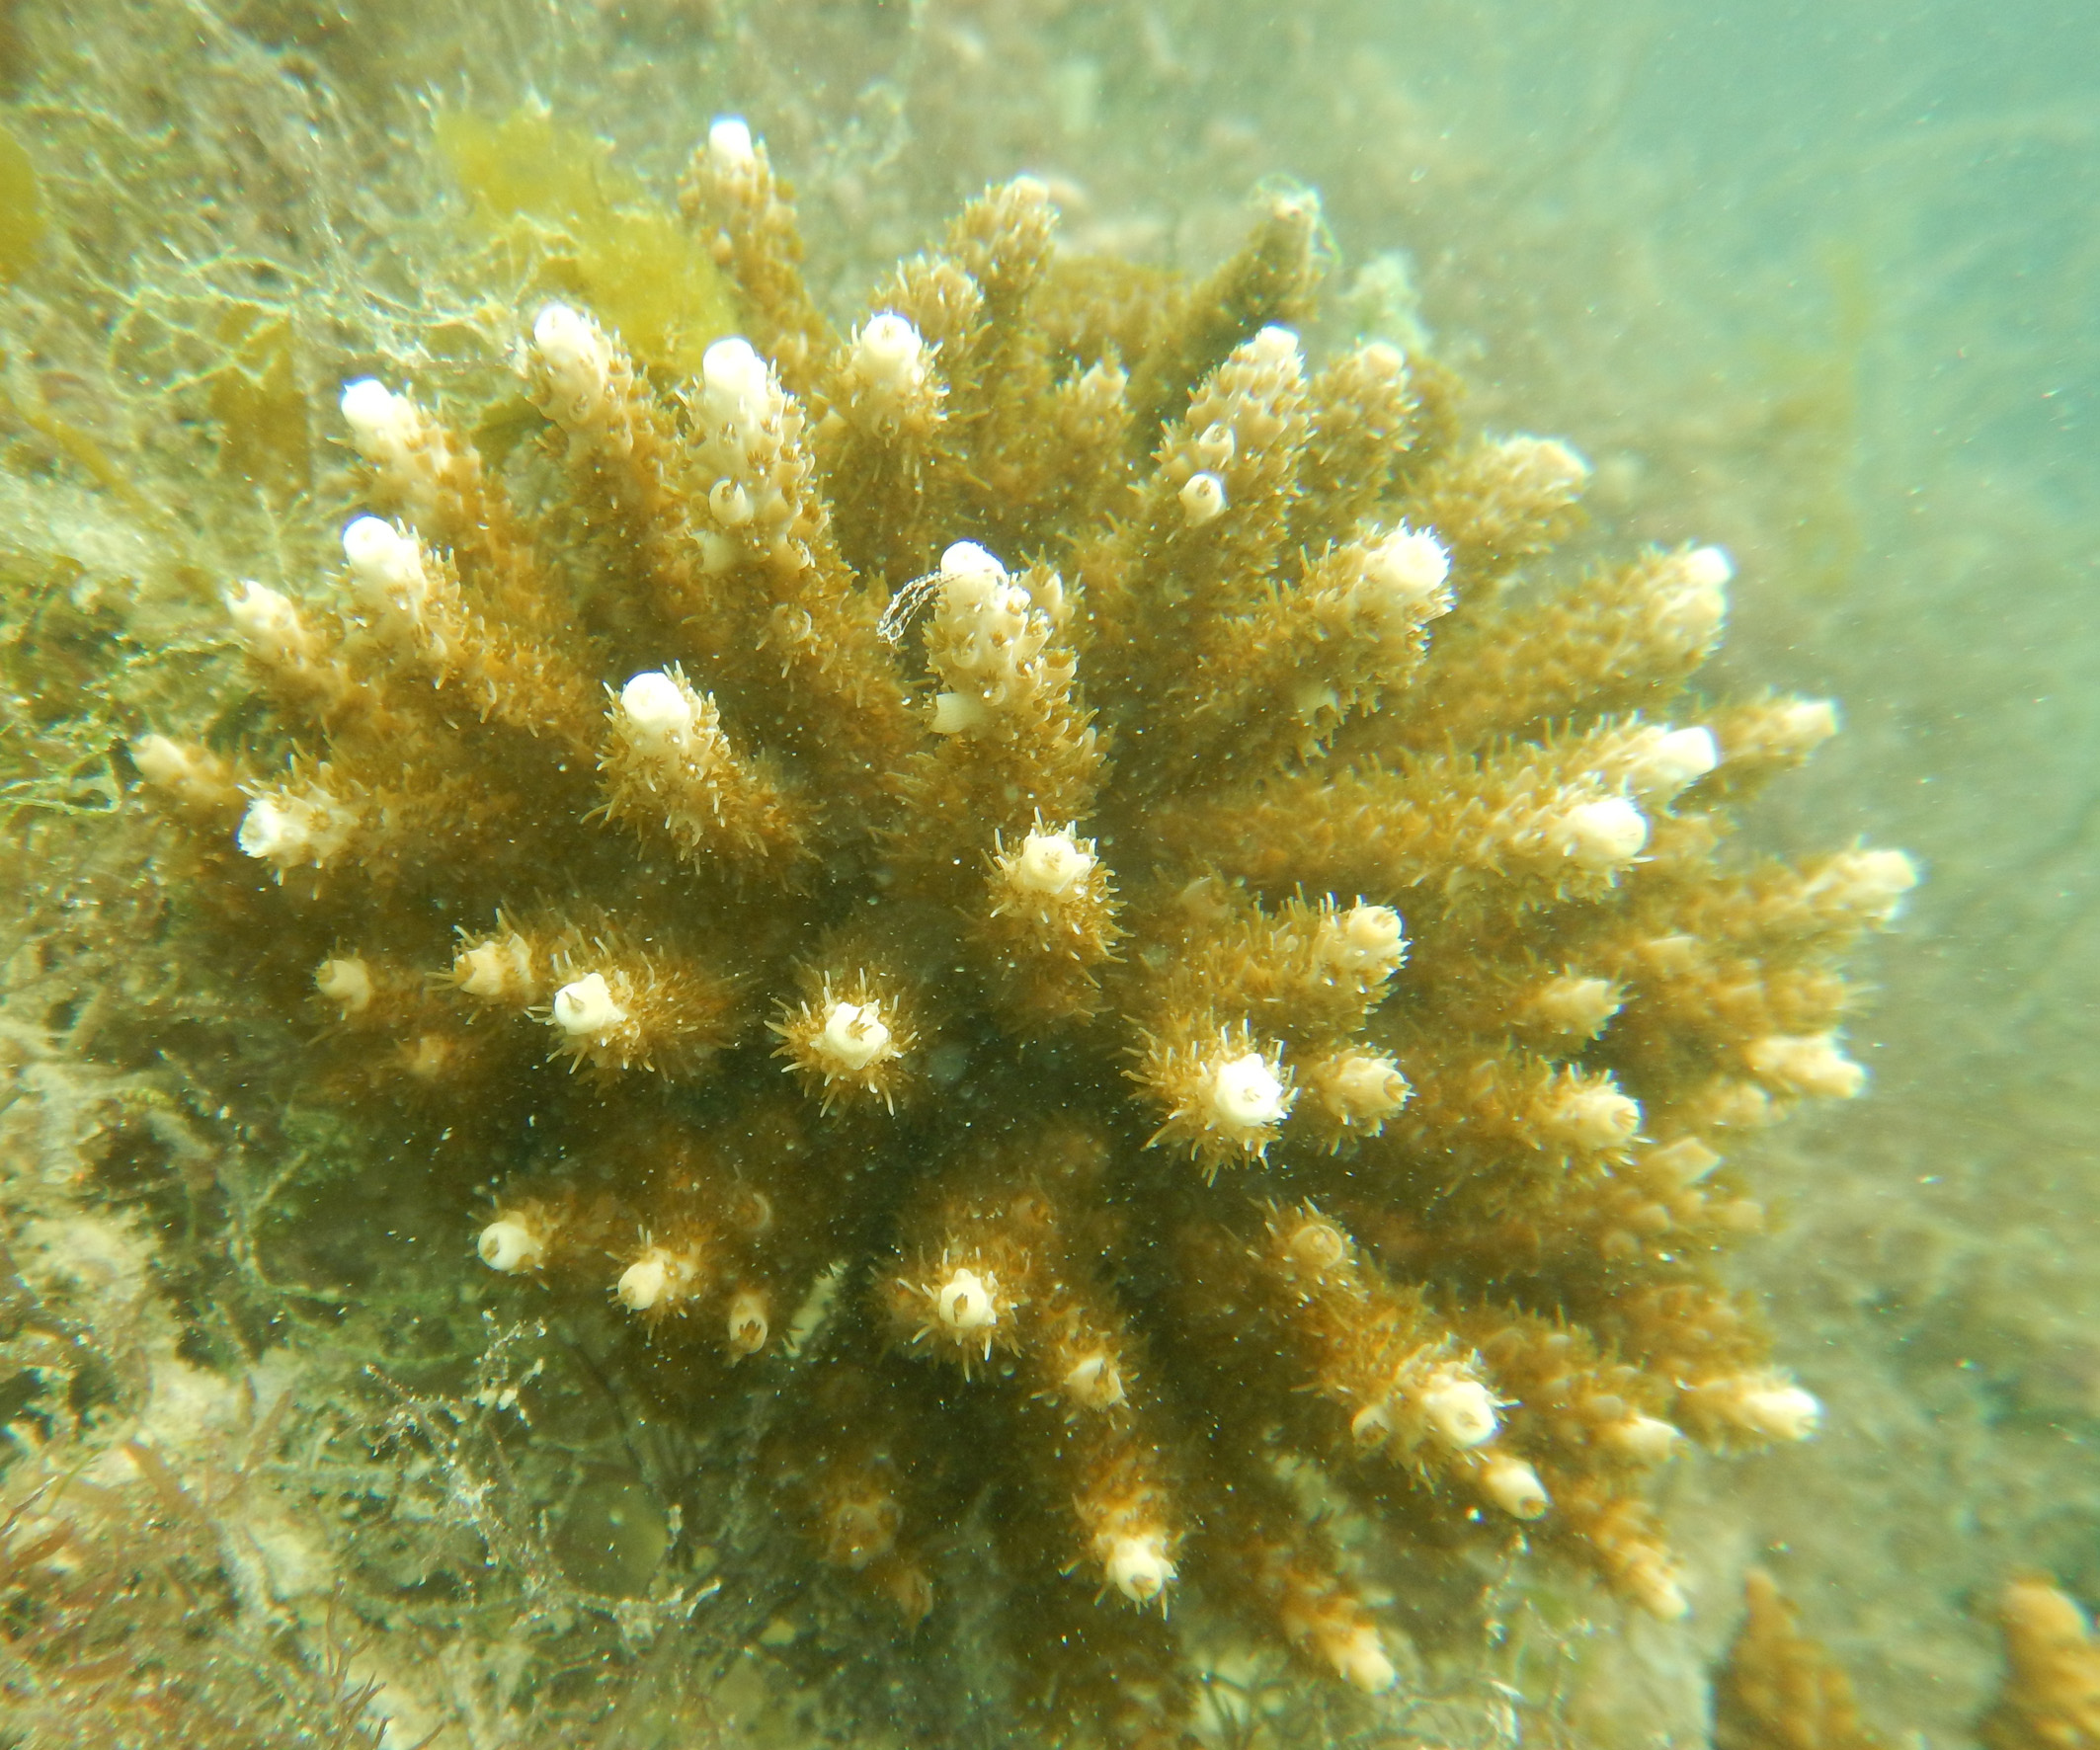 Stag horn corals thriving in the turbid waters of the Gulf of Kutch